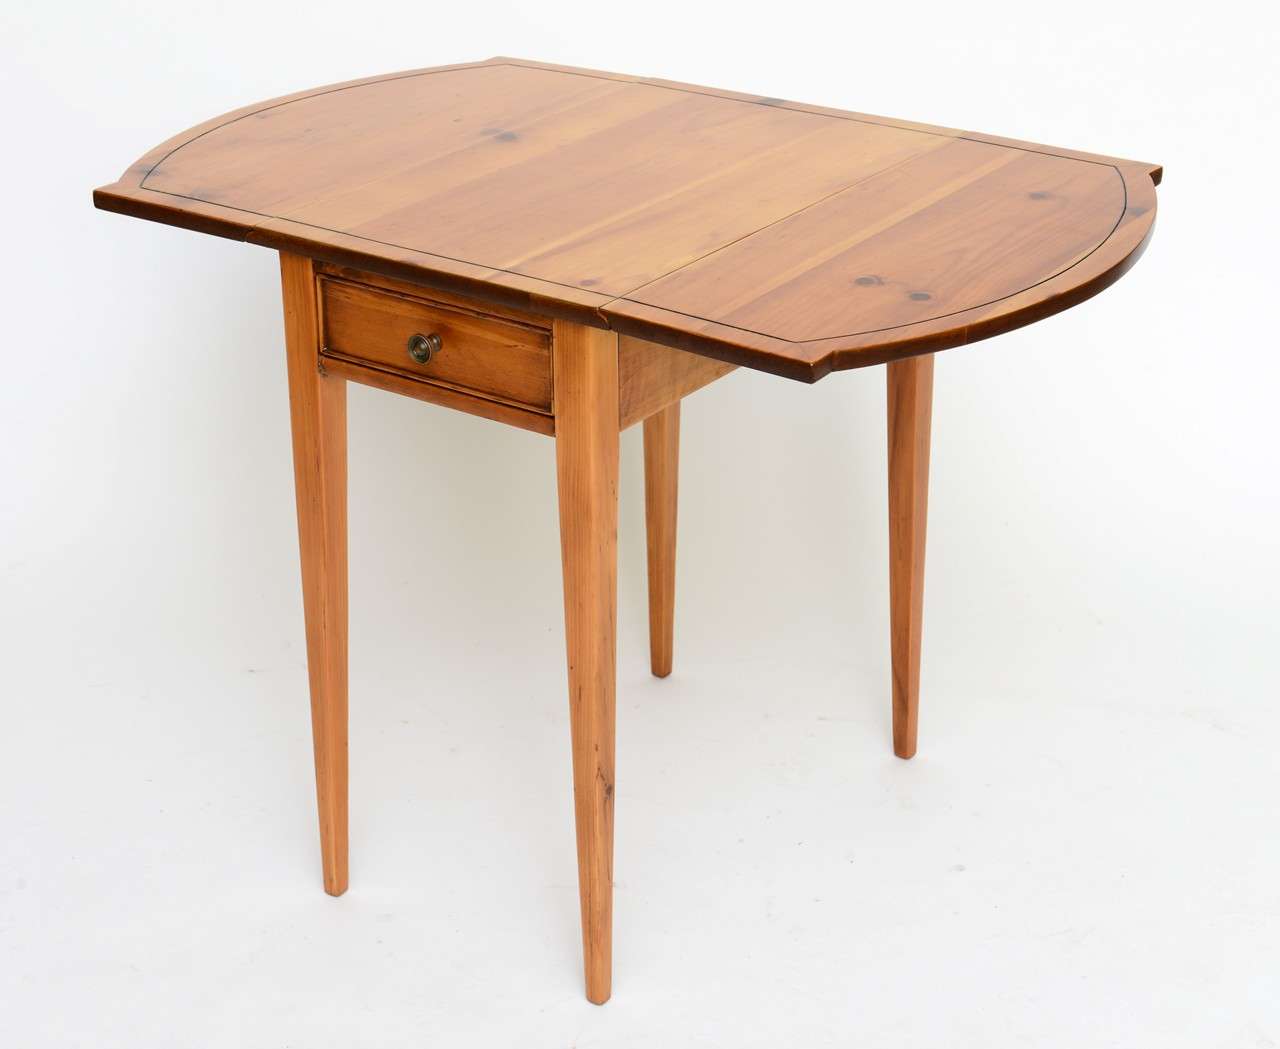 Reduced from $985.
From the 19 40s, this Pembroke drop-leaf table was made in Maryland by Brandt. Constructed of pine, it features a single beaded drawer and incised faux stringing on the top creating a banded like edge. The drop leafs have a